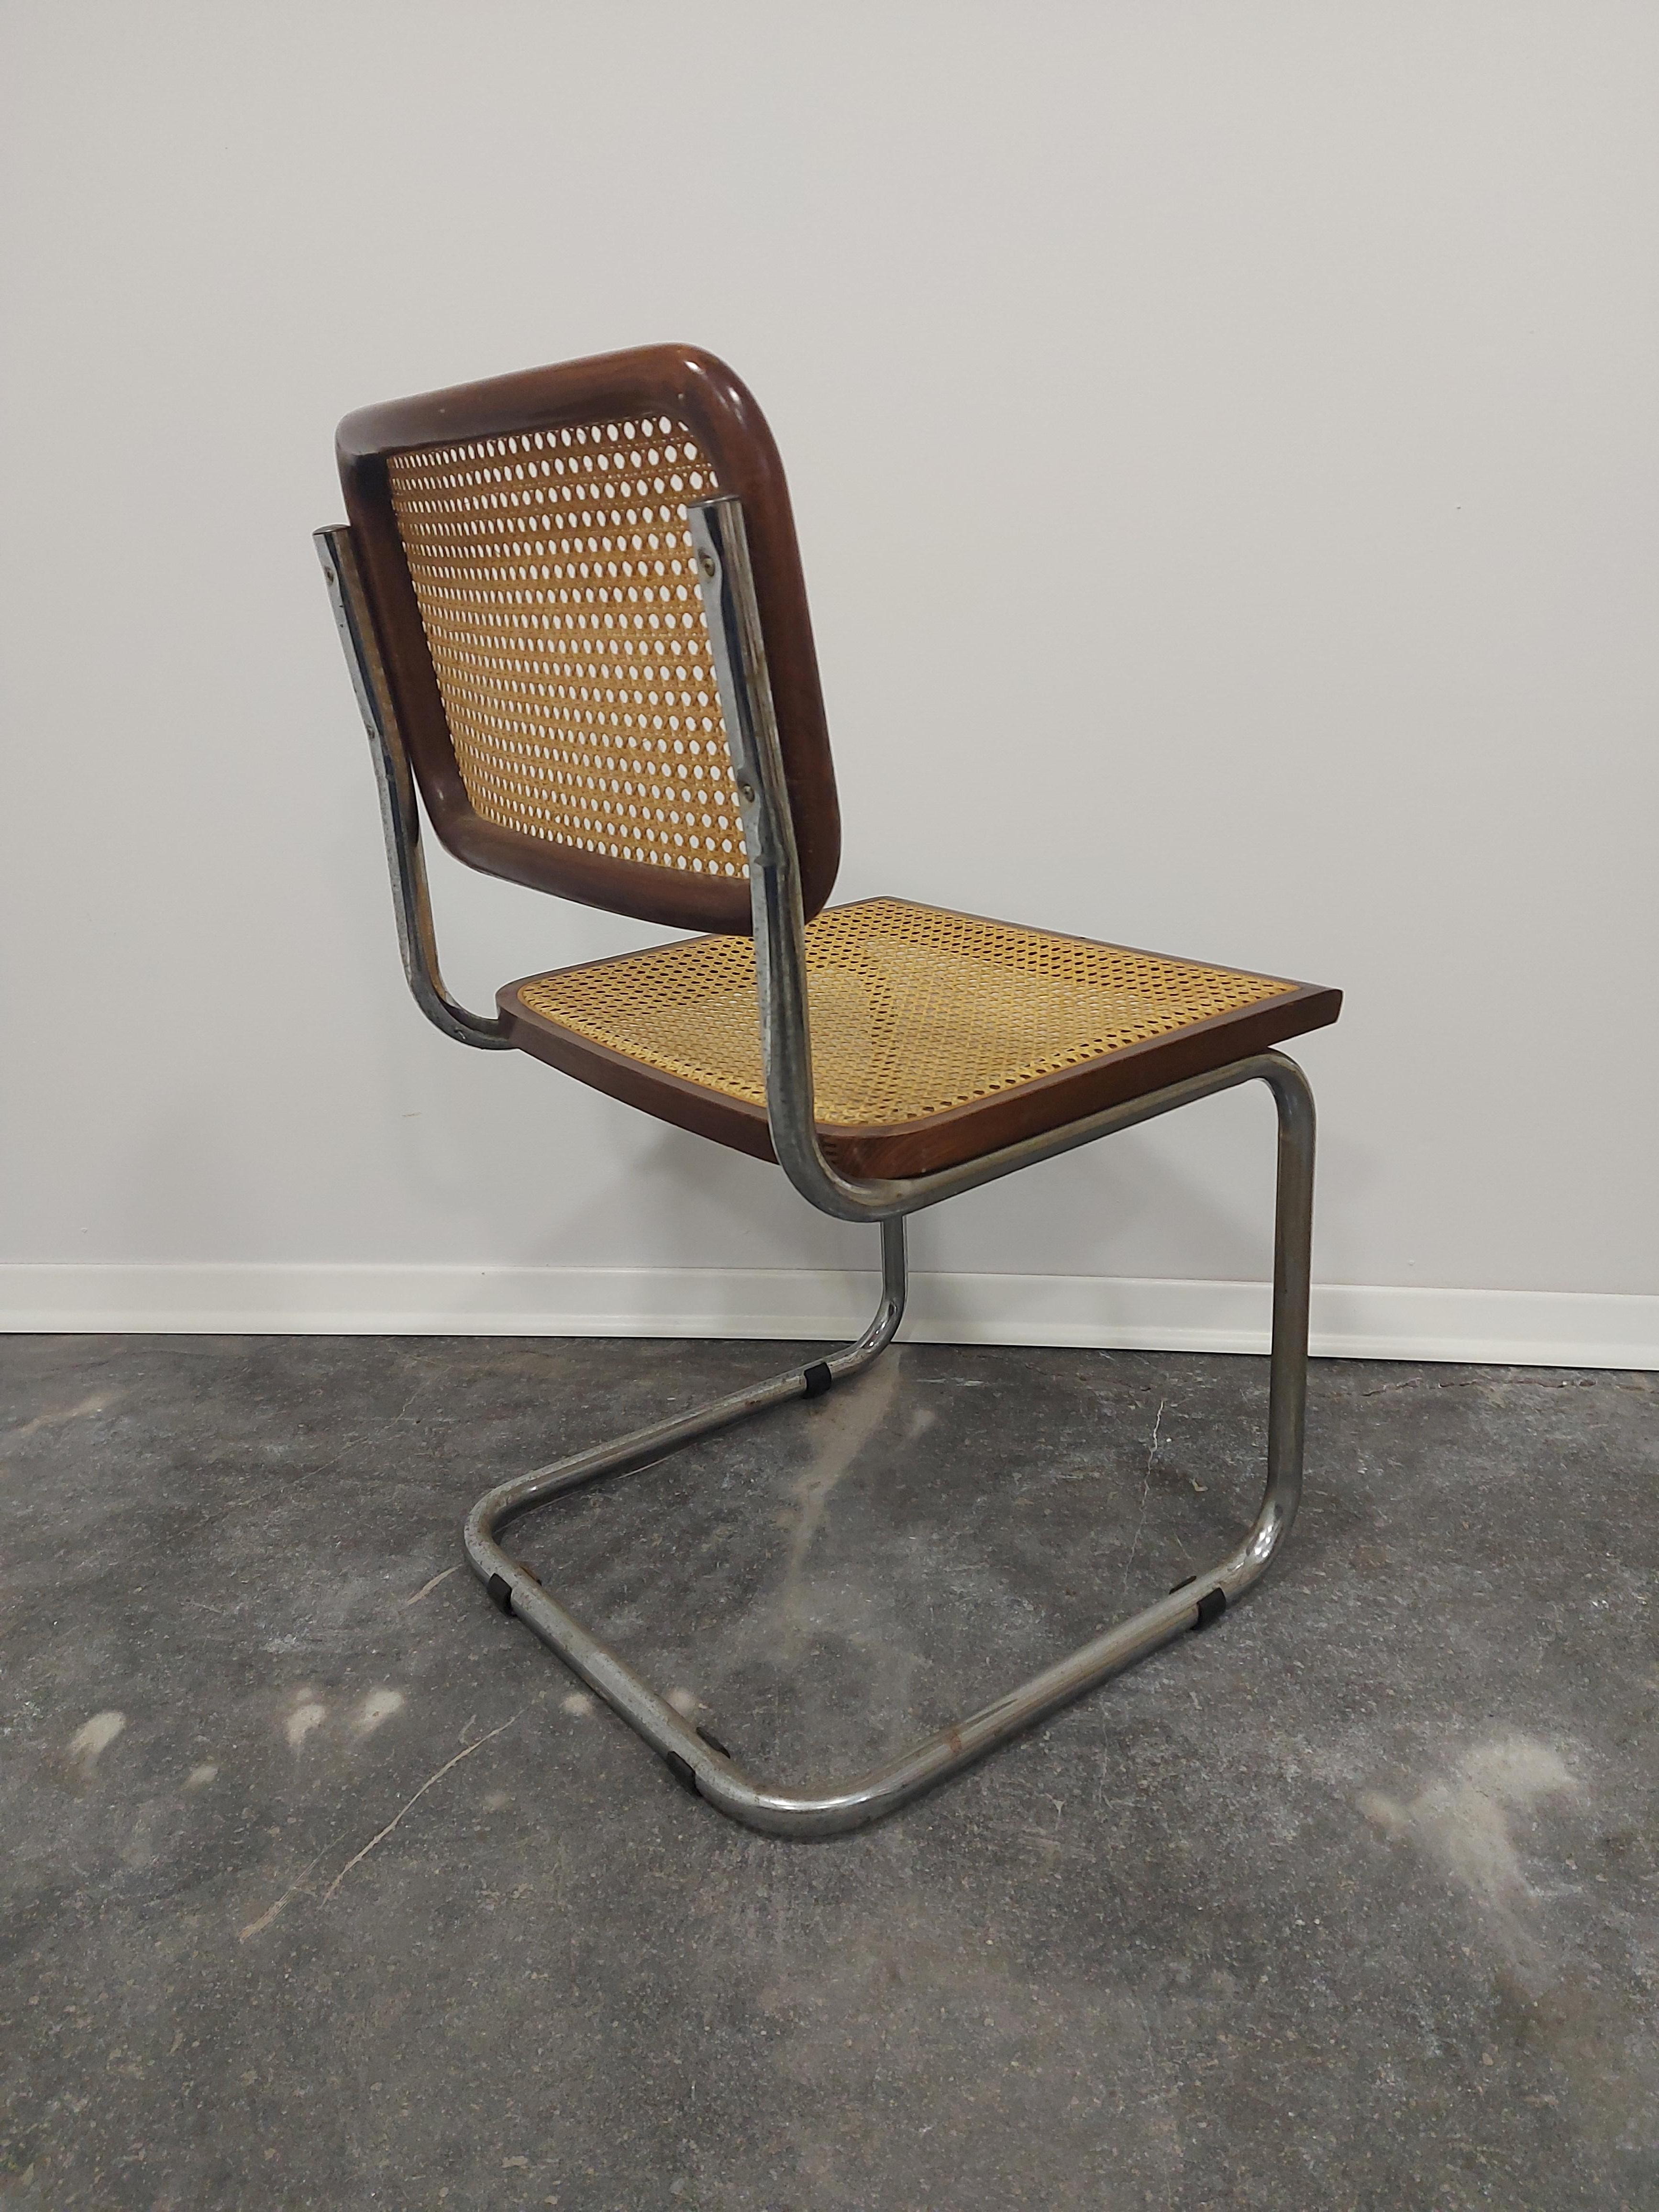 Cesca Chair by Marcel Breuer 1970s B32 1 of 5 For Sale 6